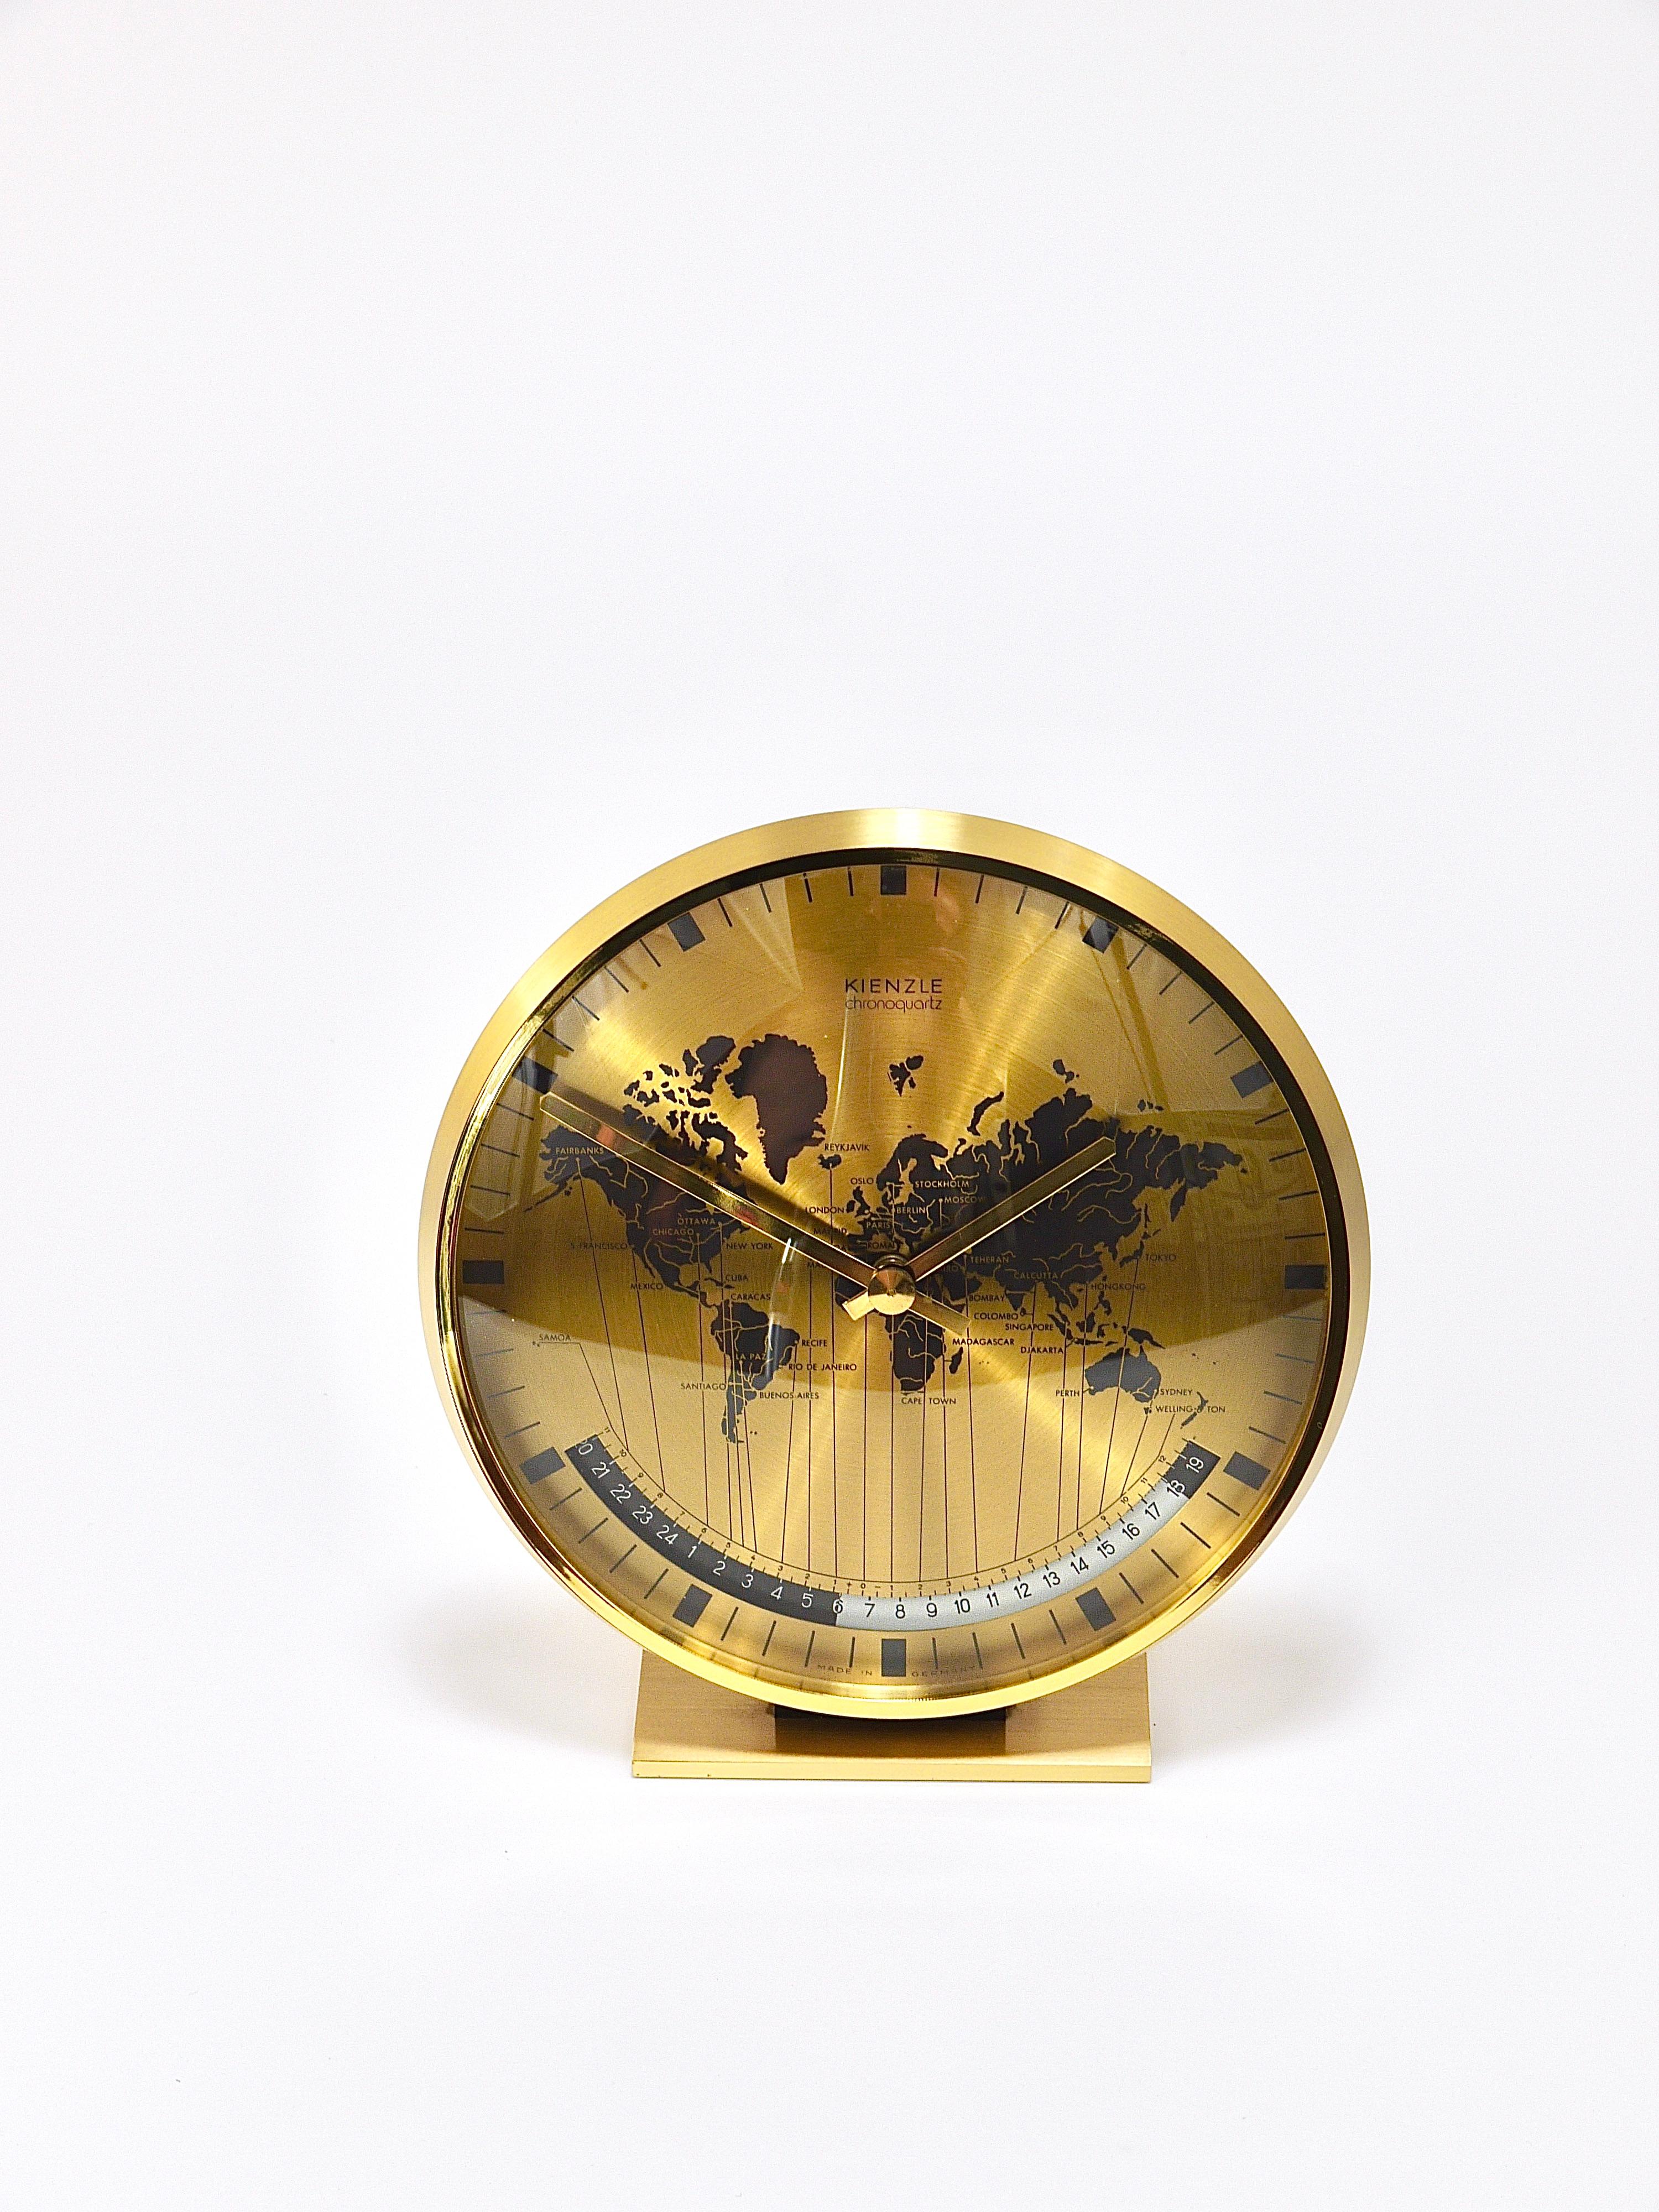 Kienzle GMT World Time Zone Brass Table Clock, Midcentury, Germany, 1960s For Sale 1